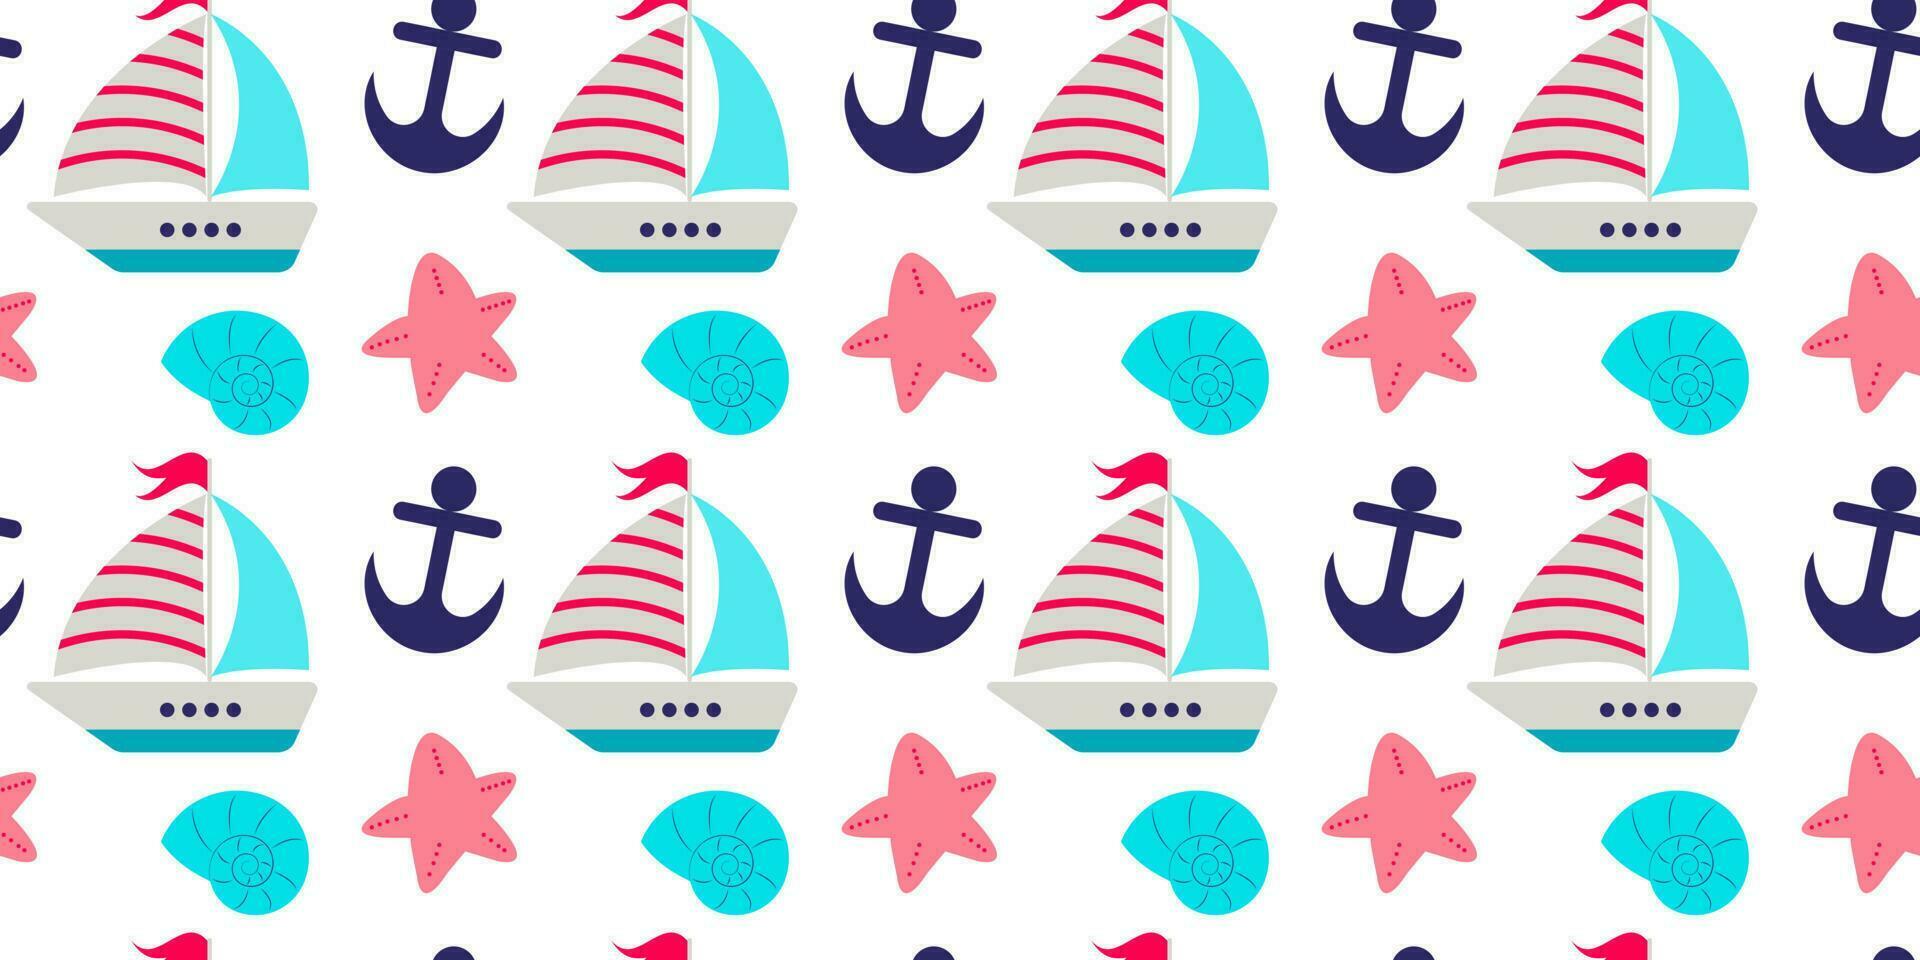 Nautical elements seamless pattern. Boat. shells, starfish and anchor vector